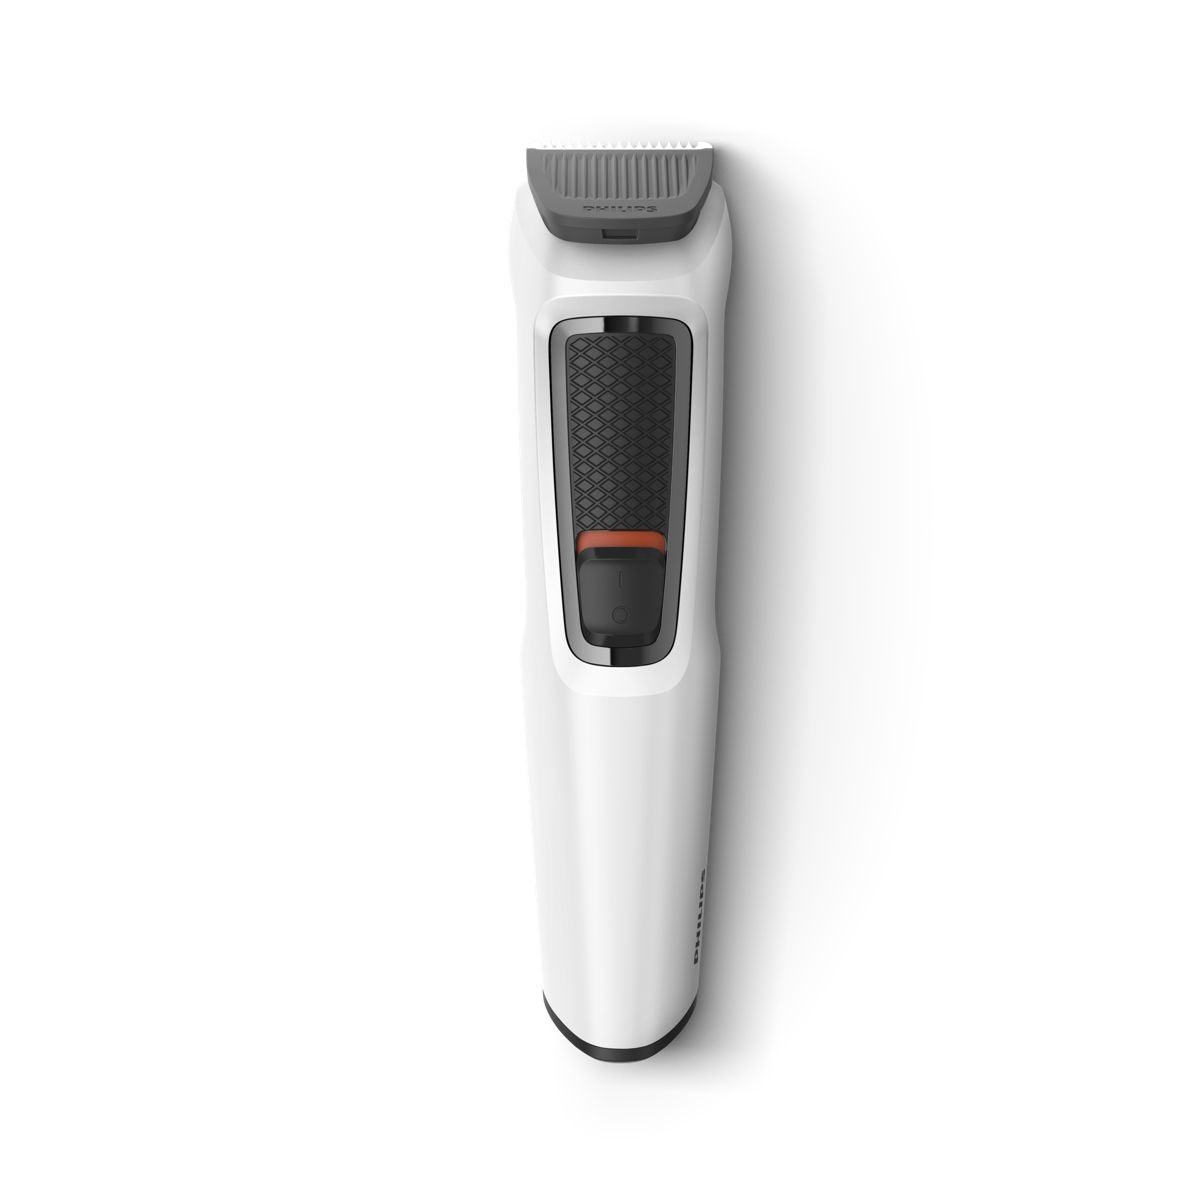 Philips Multigroom All in One Trimmer - MG3721/77 Philips